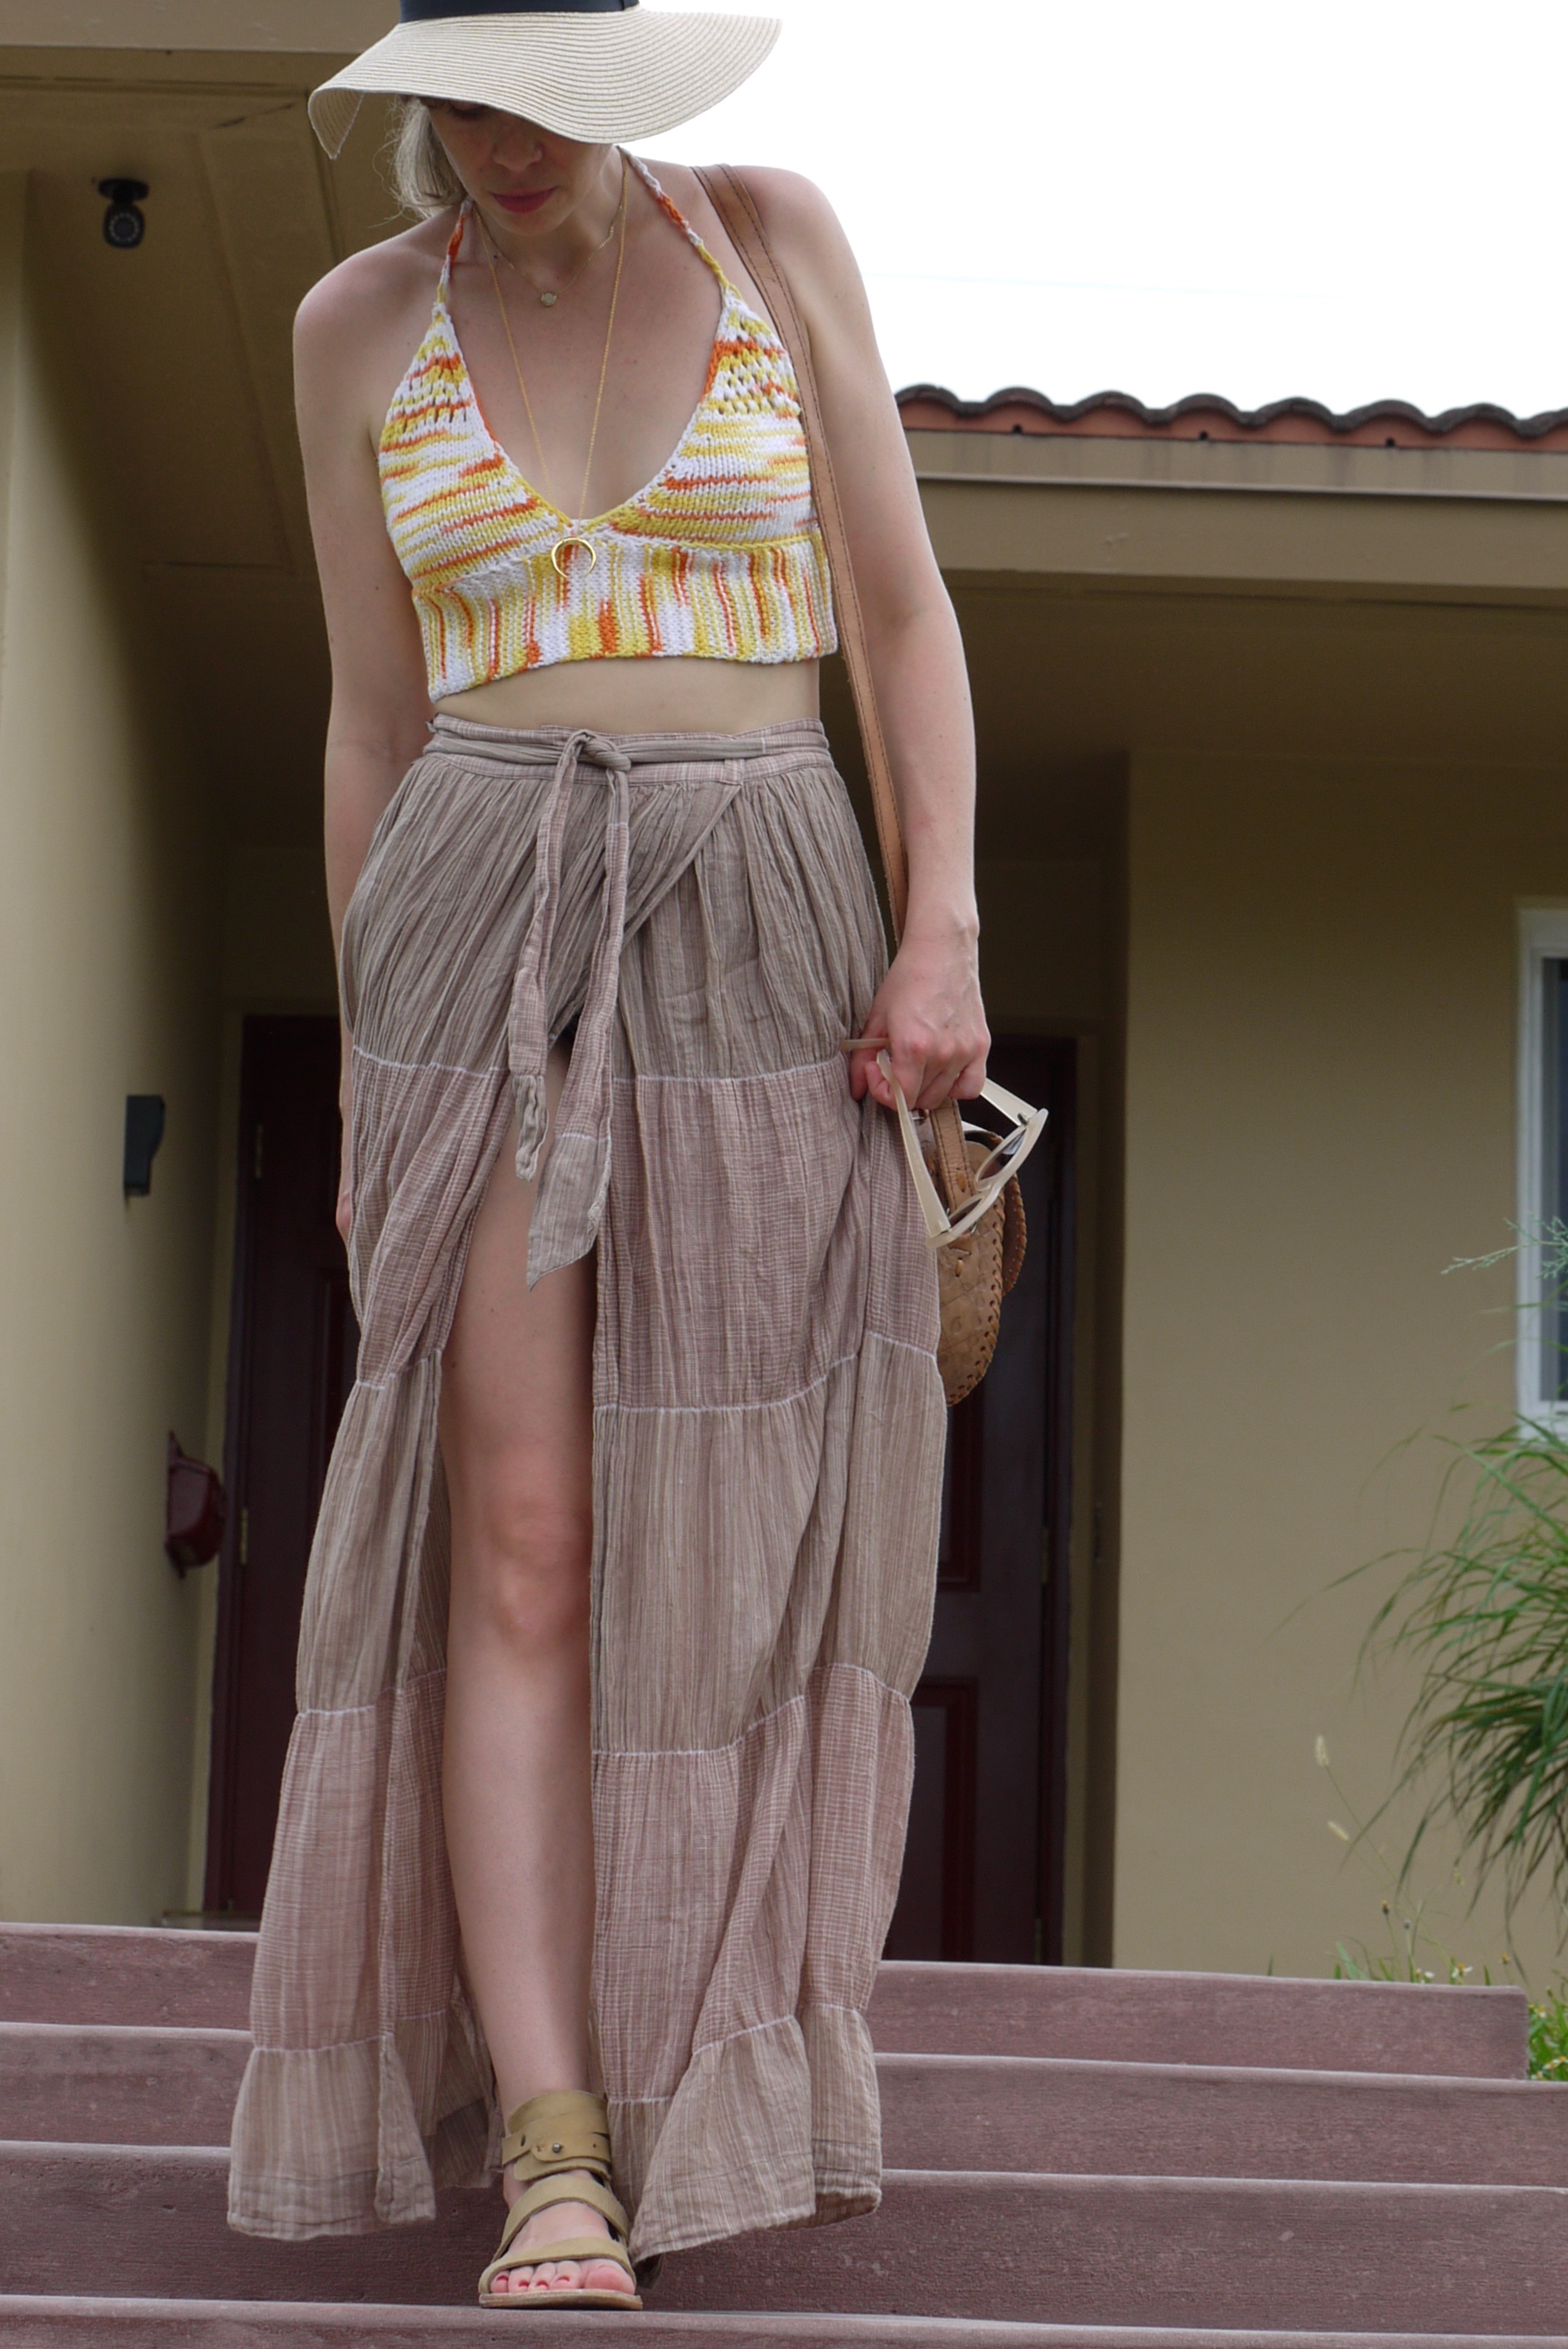 Wrap skirt + knit with gladiator sandals